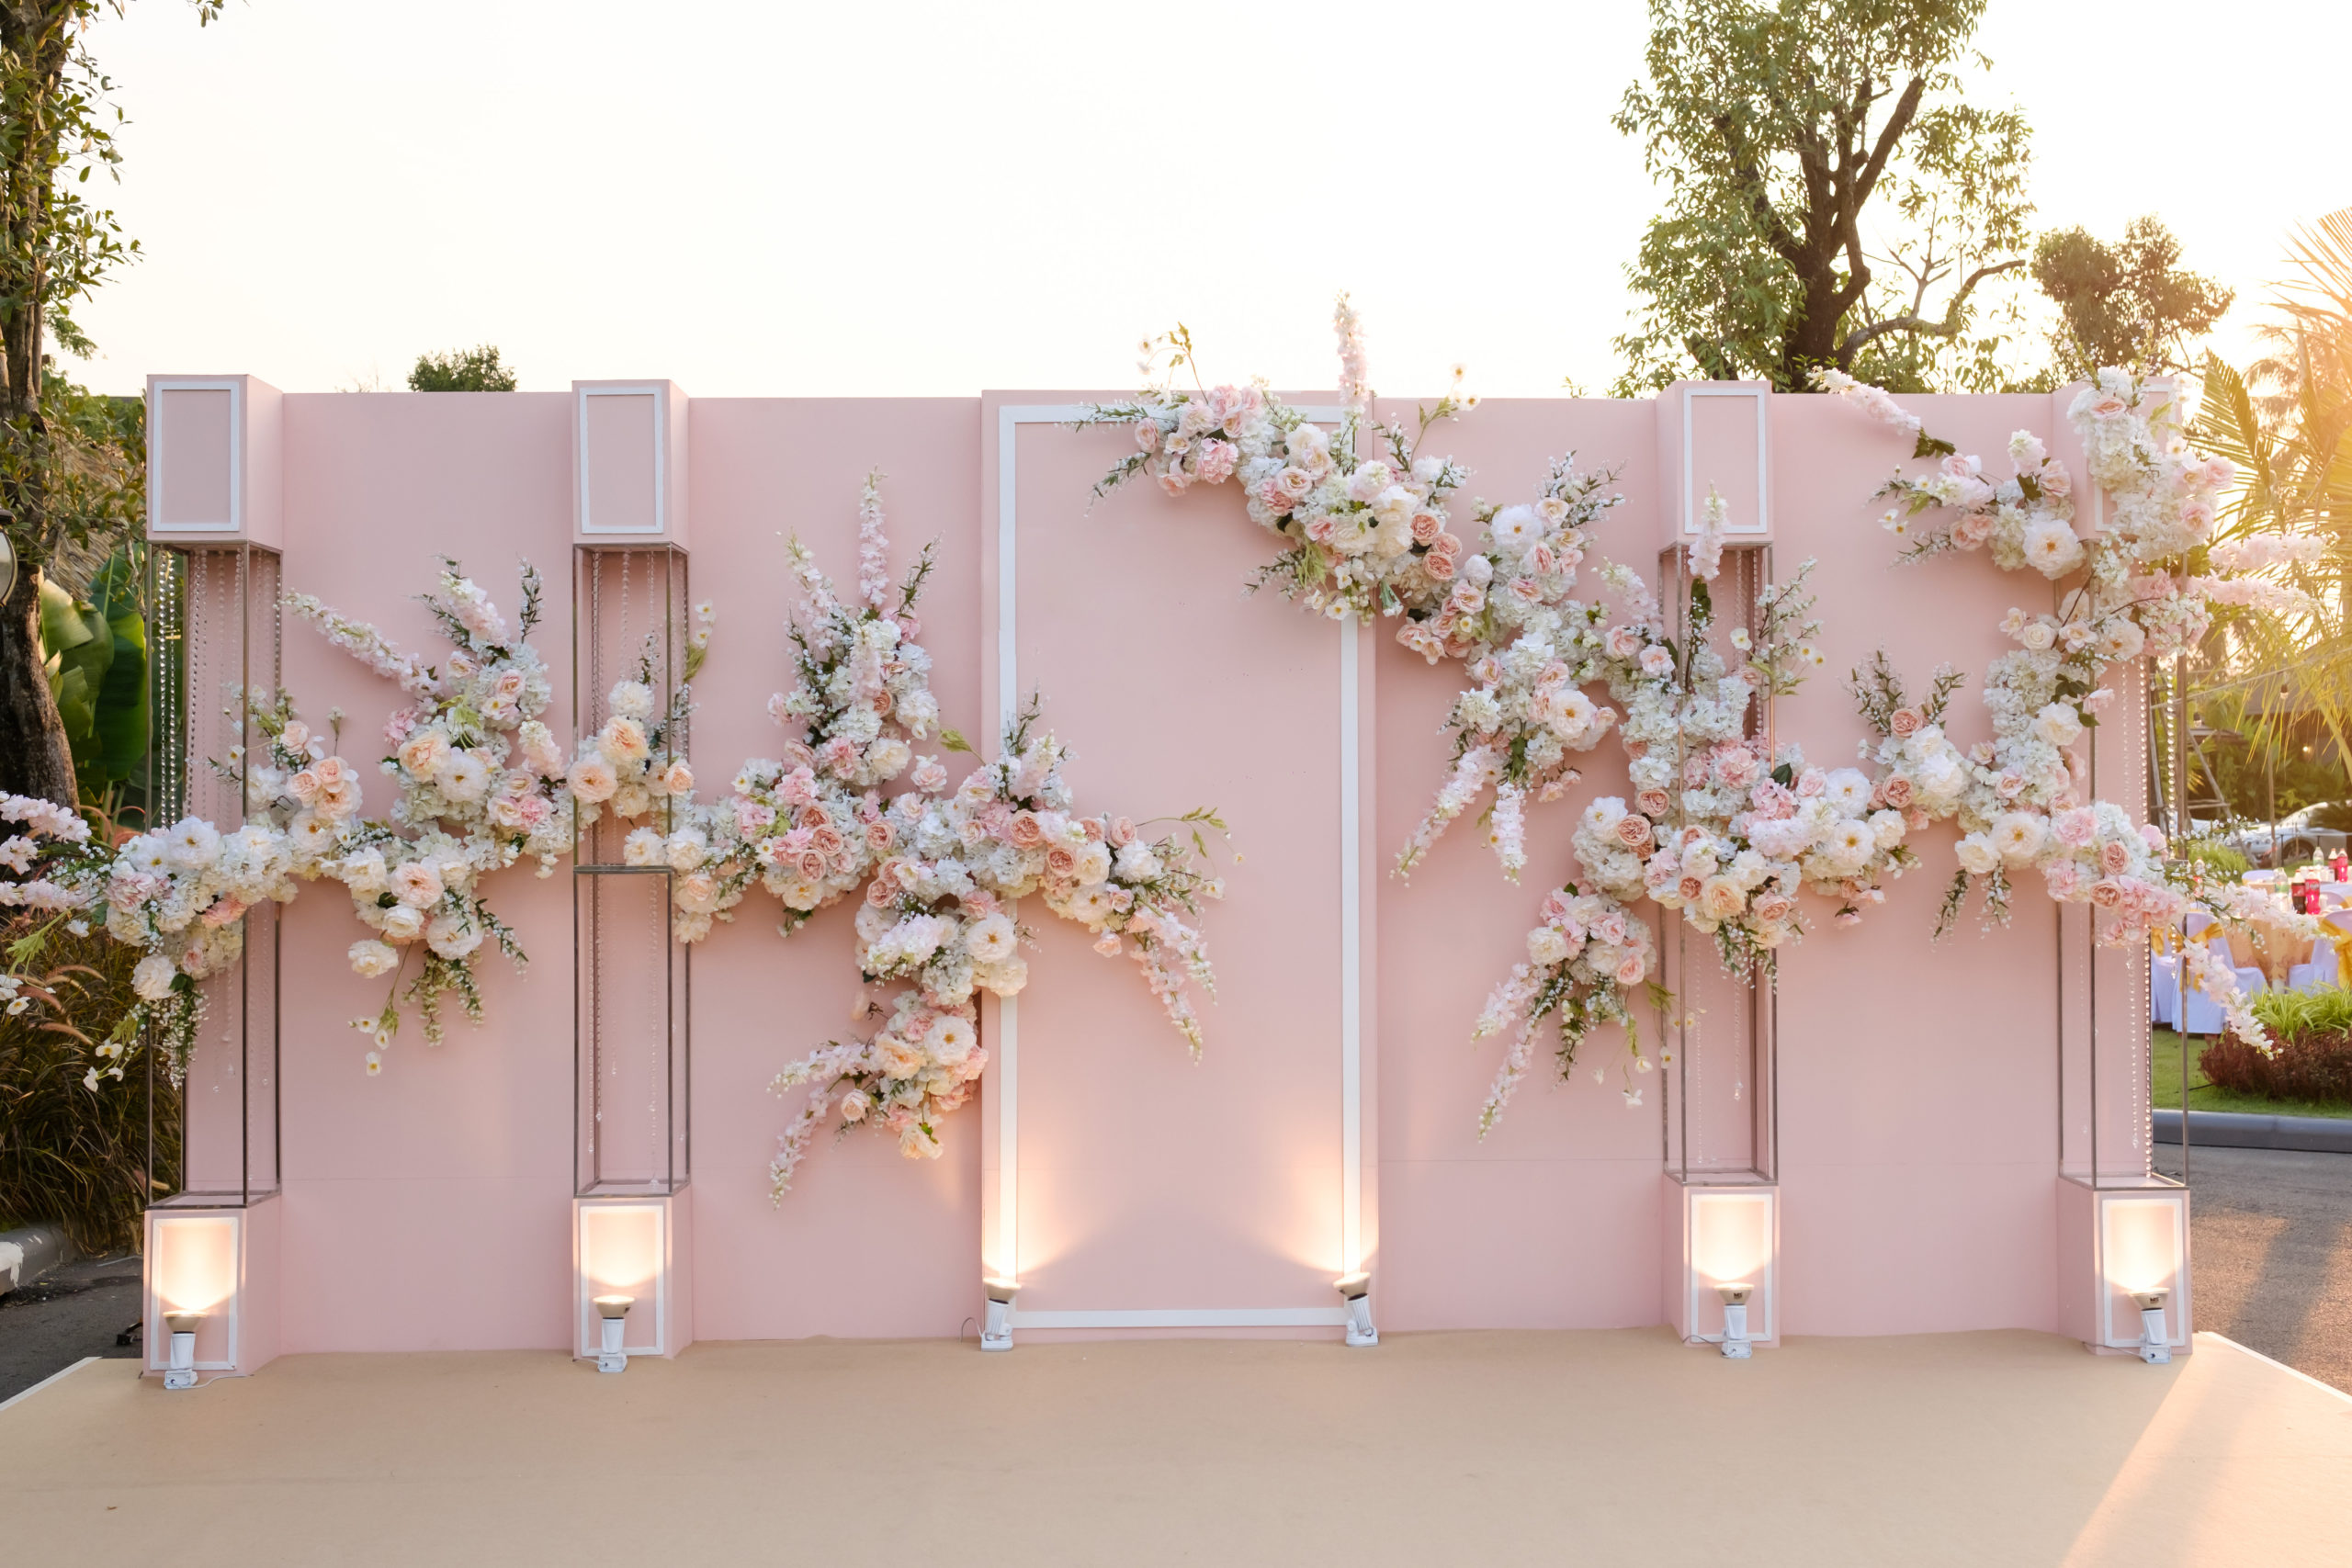 70 Awe-Inspiring Wedding Ceremony Backdrop Ideas You Can Steal